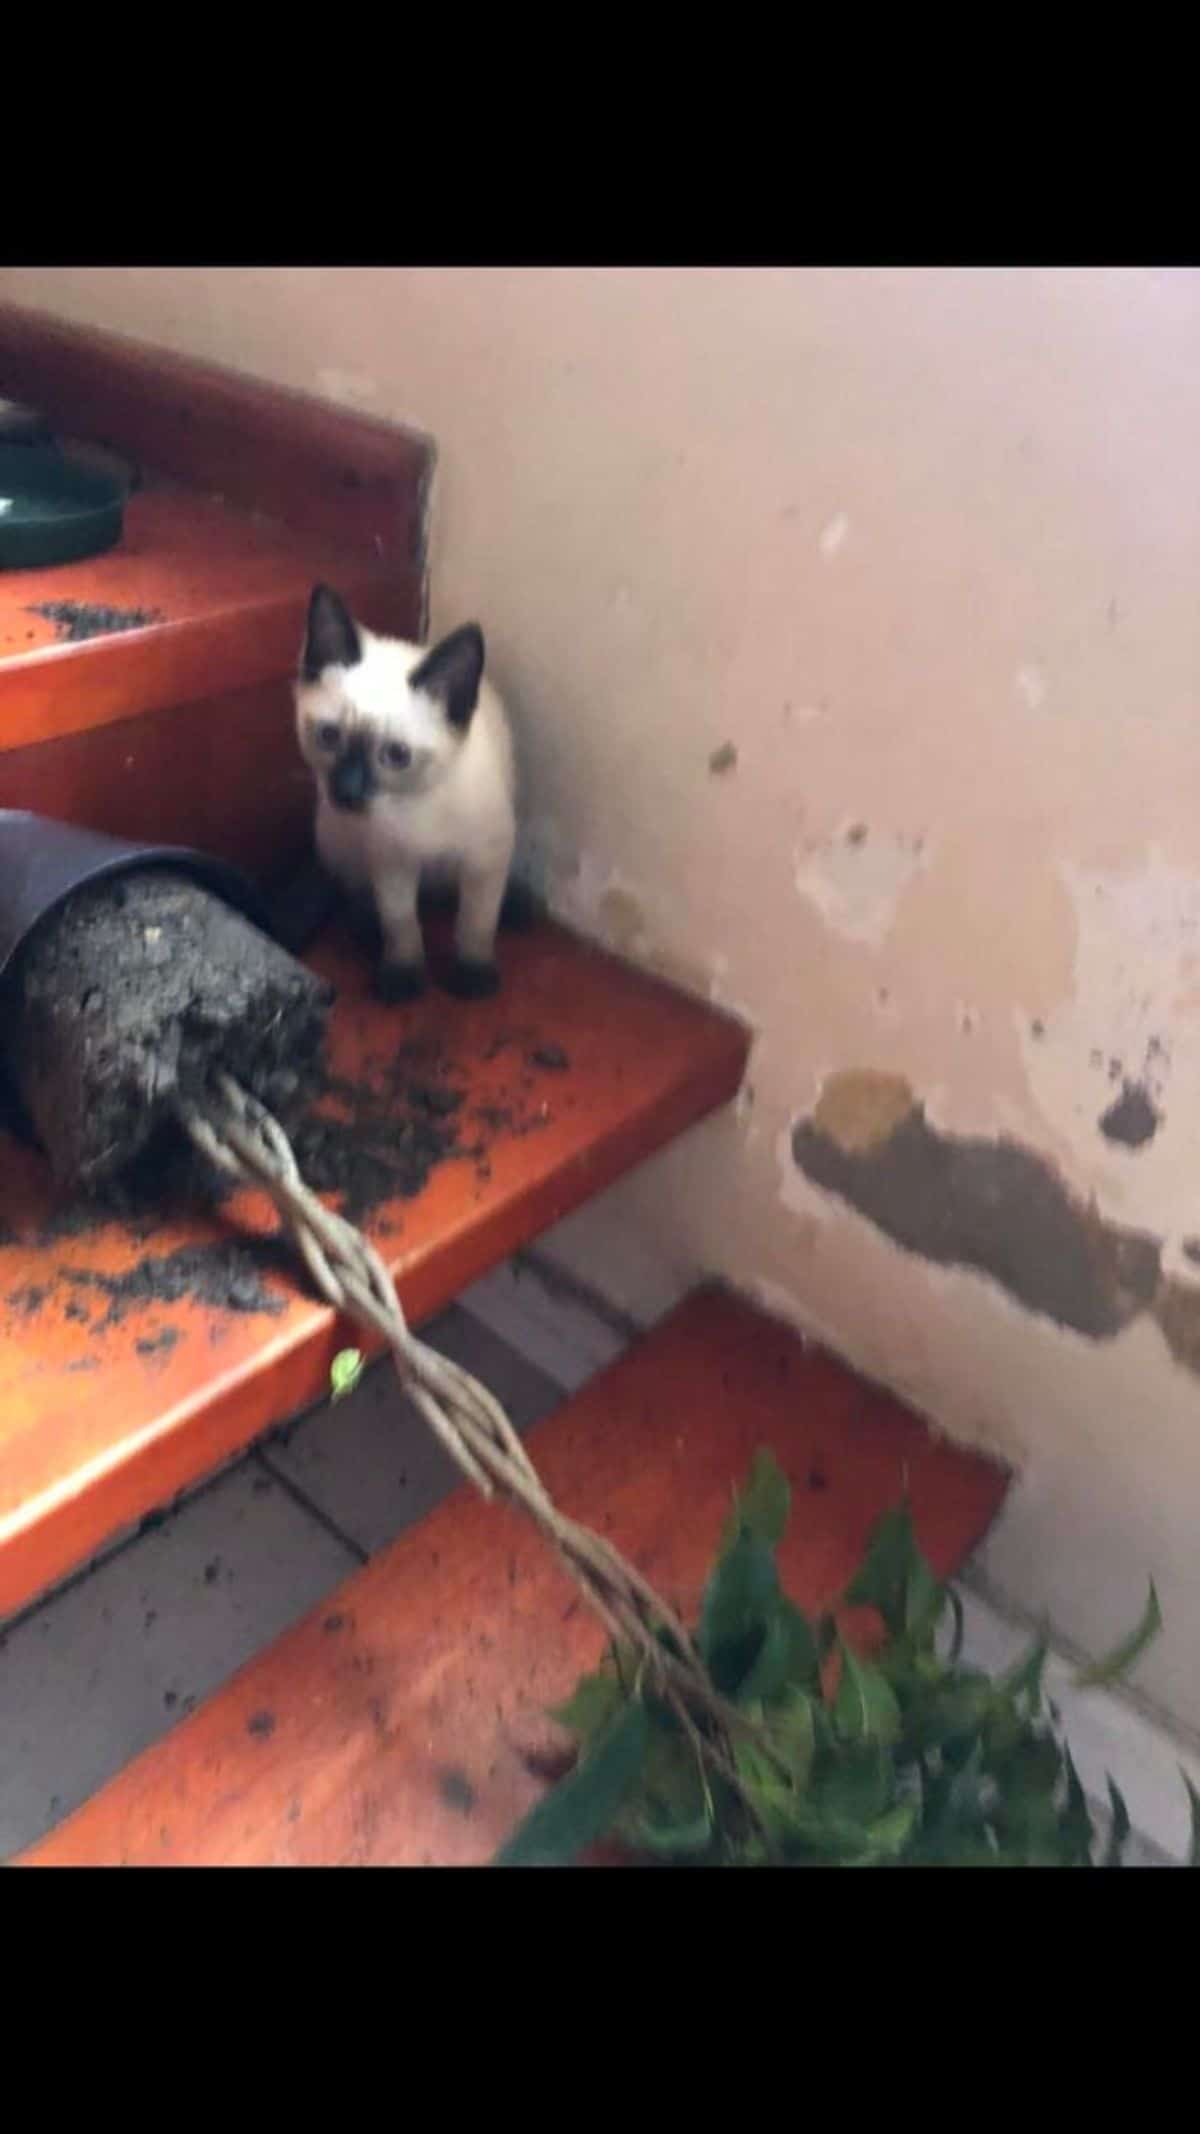 white and black siamese kitten sitting on a red stair next to a potted plant toppled over